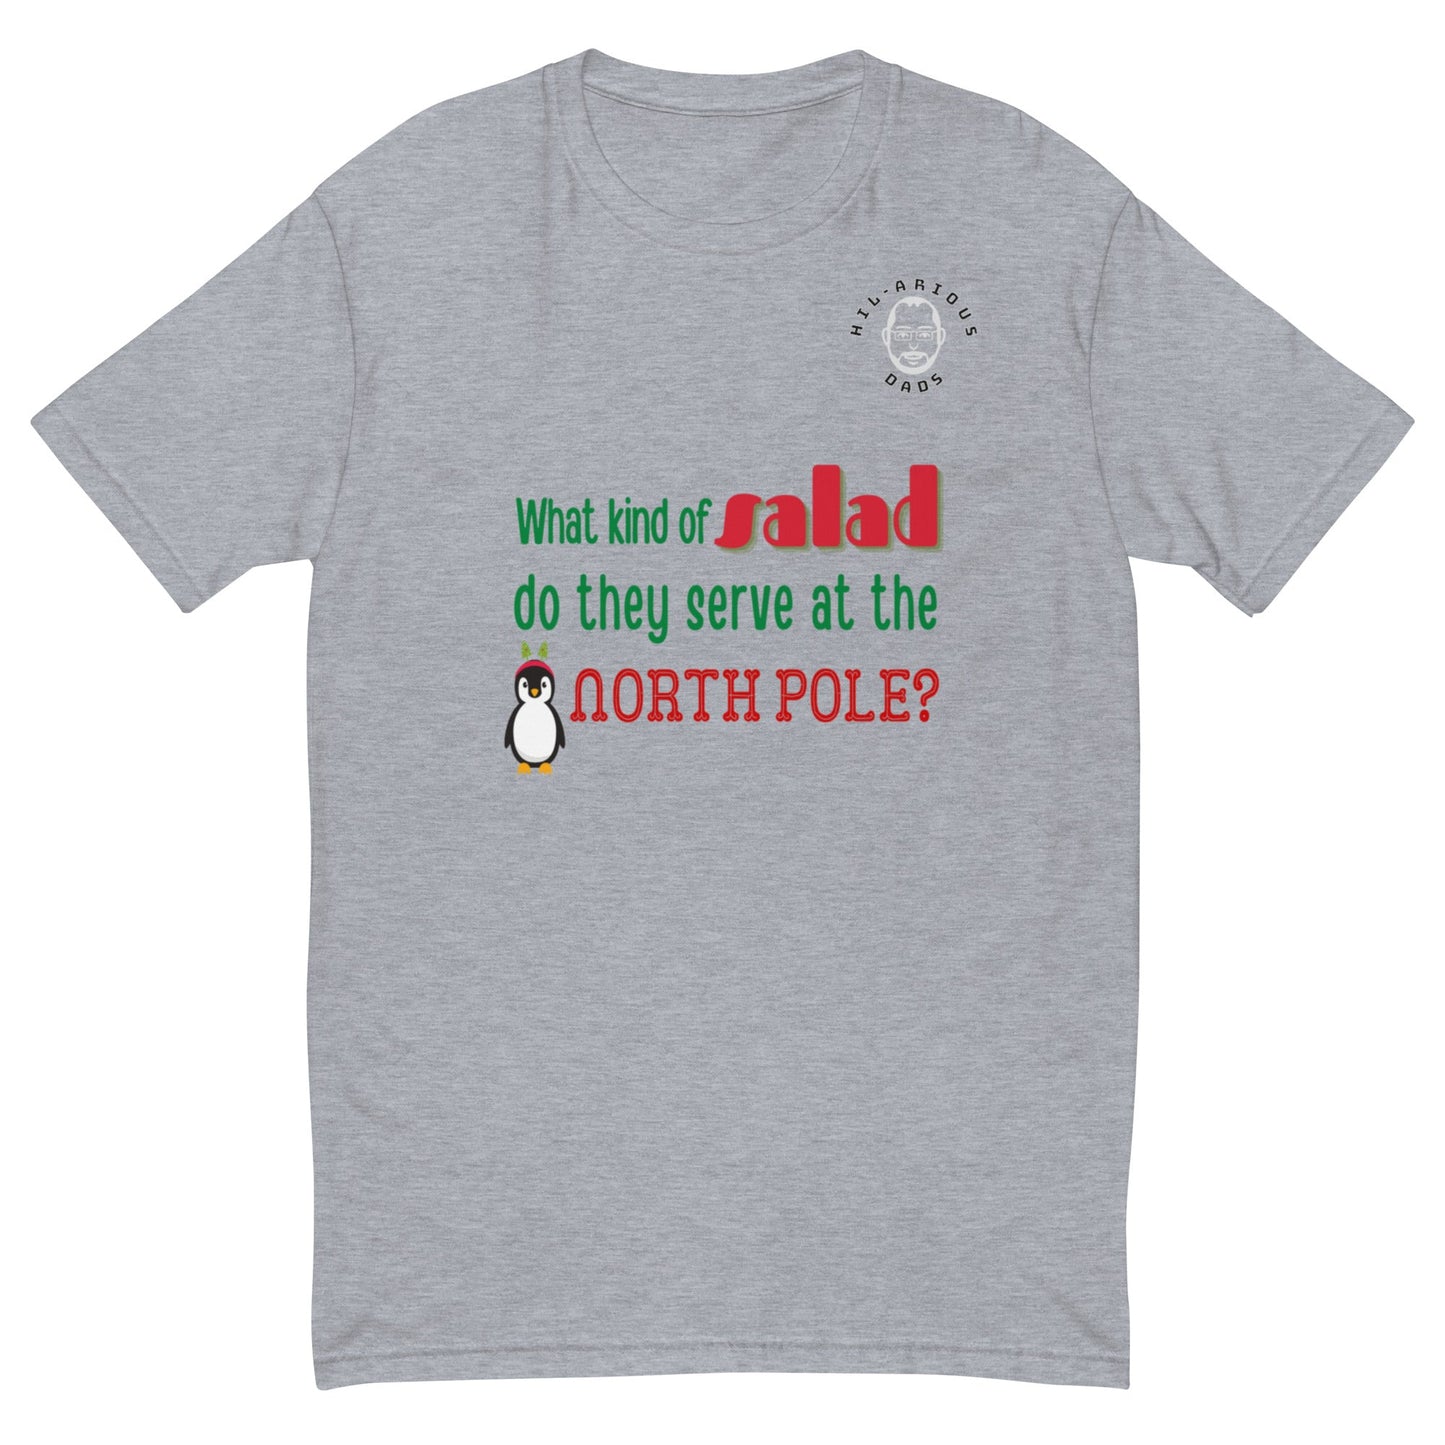 What kind of salad do they serve at the North Pole?-T-shirt - Hil-arious Dads